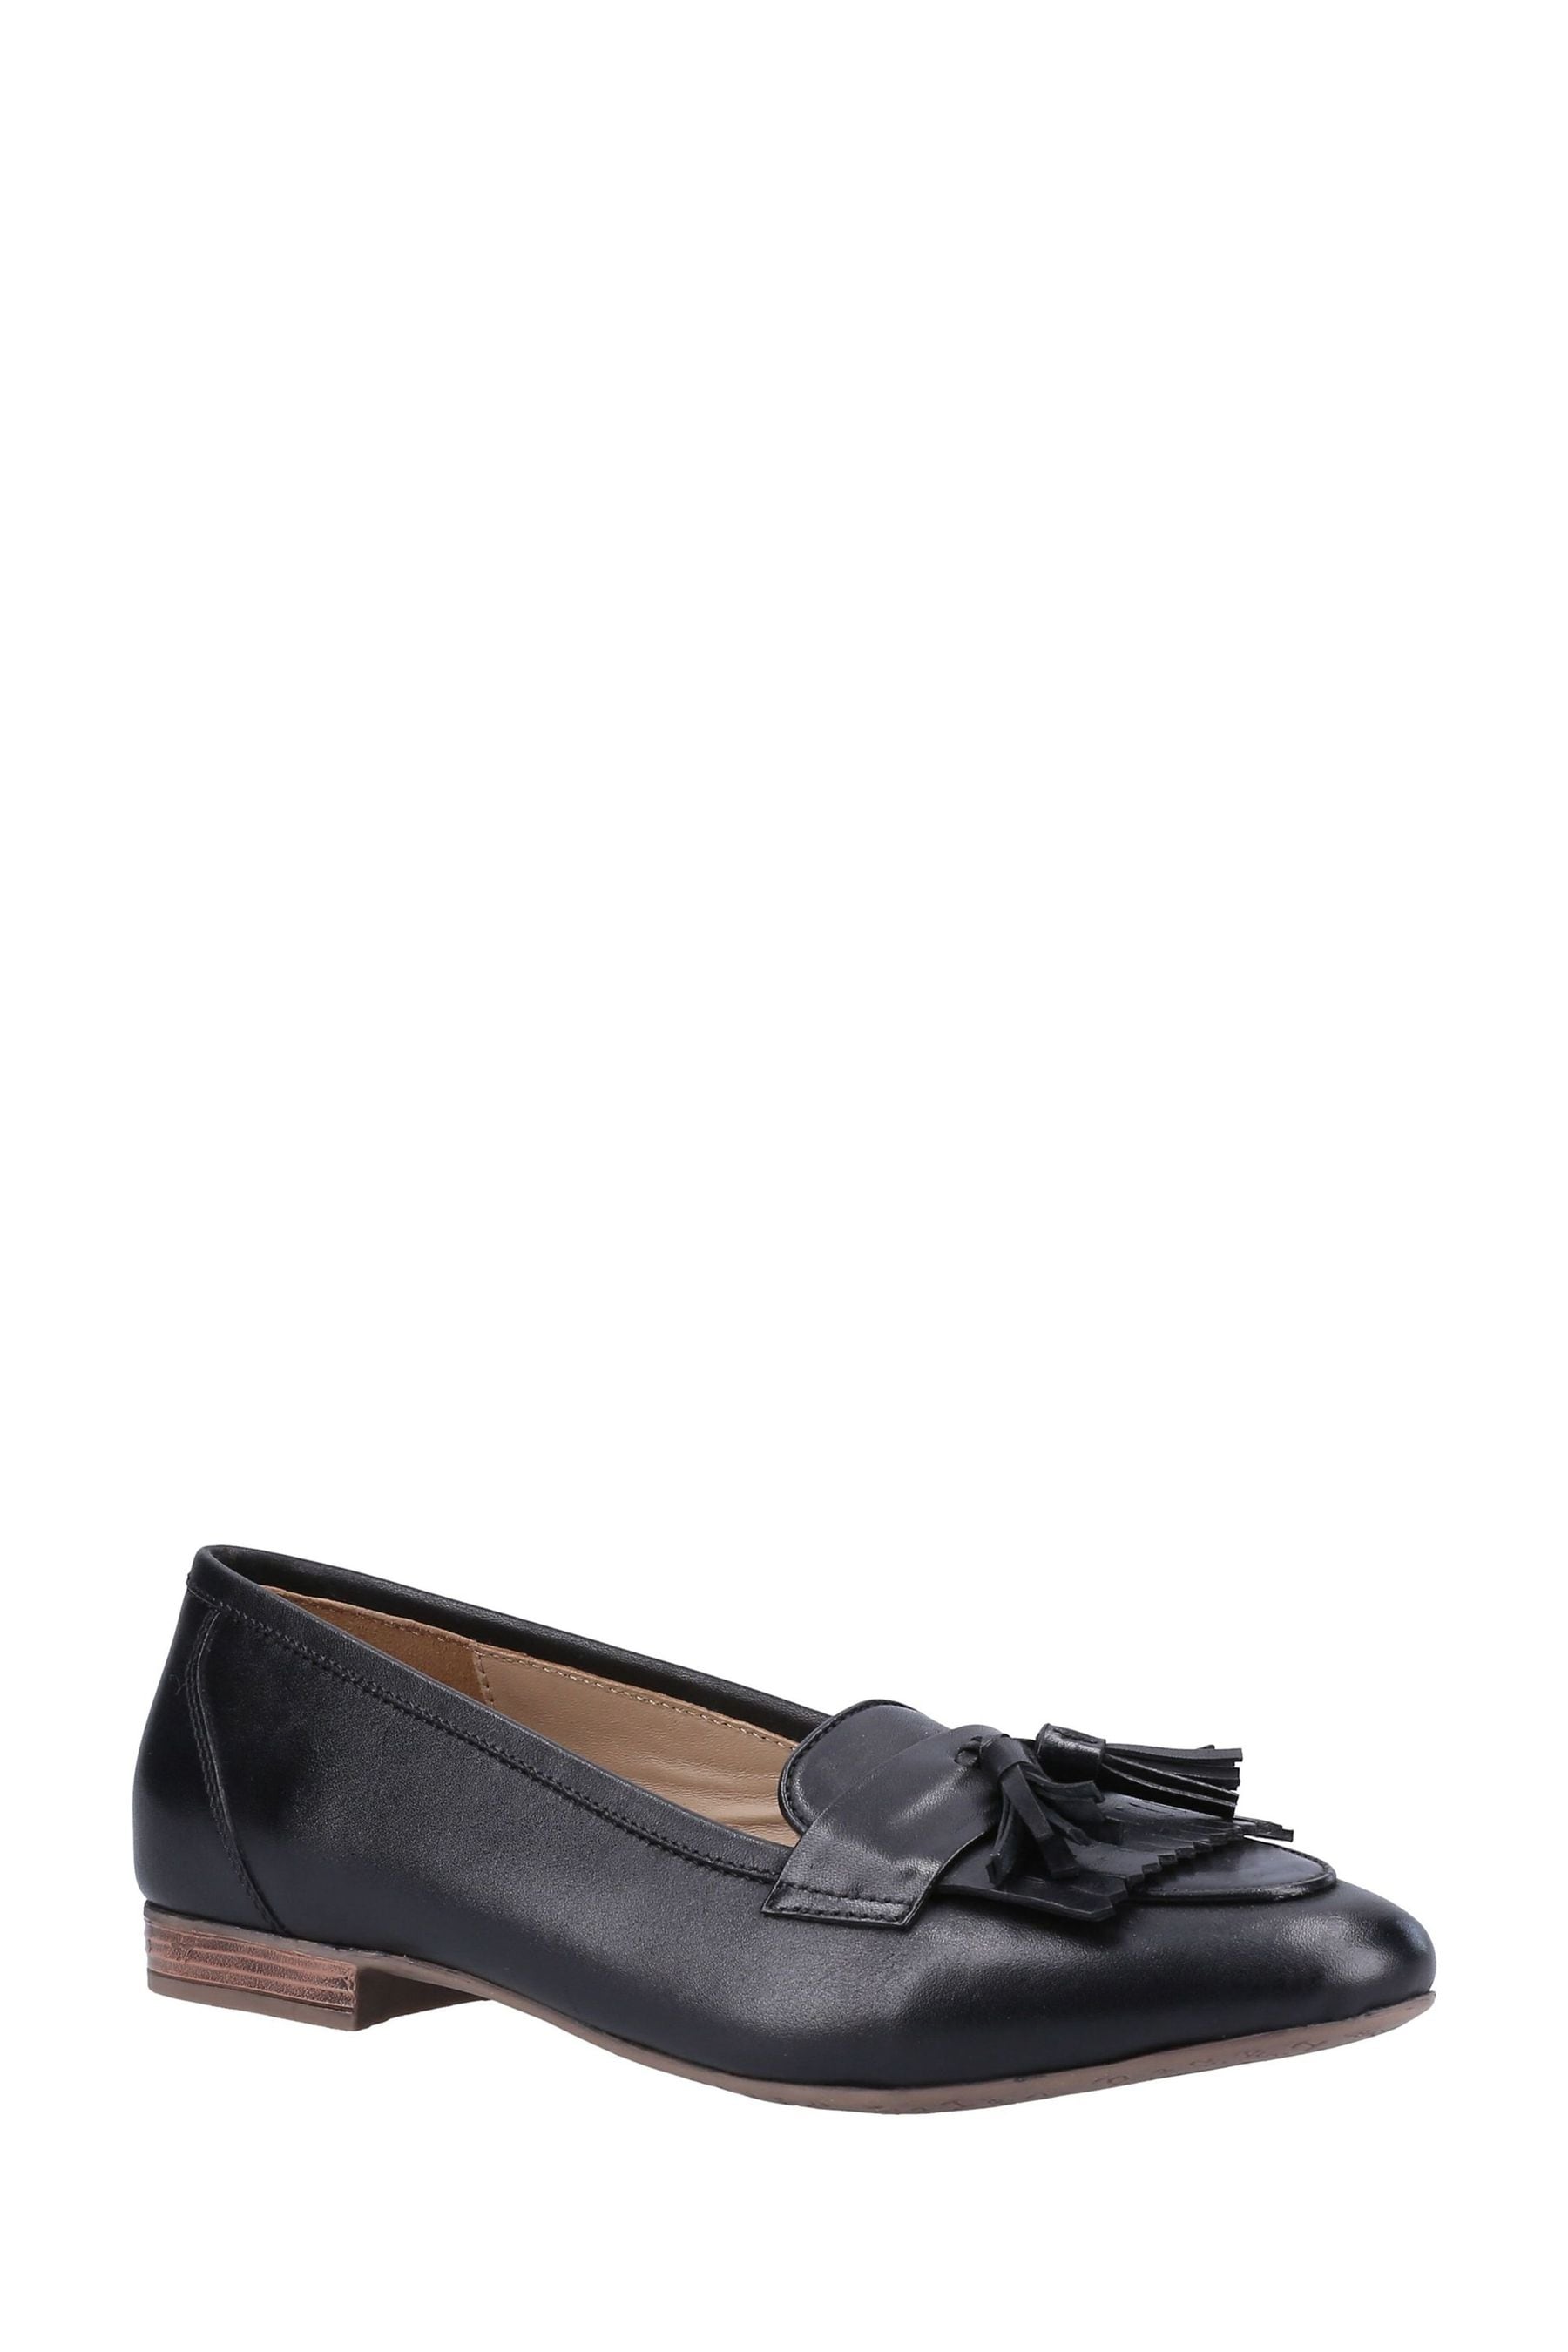 Buy Hush Puppies Marissa Brown Tassel Loafers from the Next UK online shop